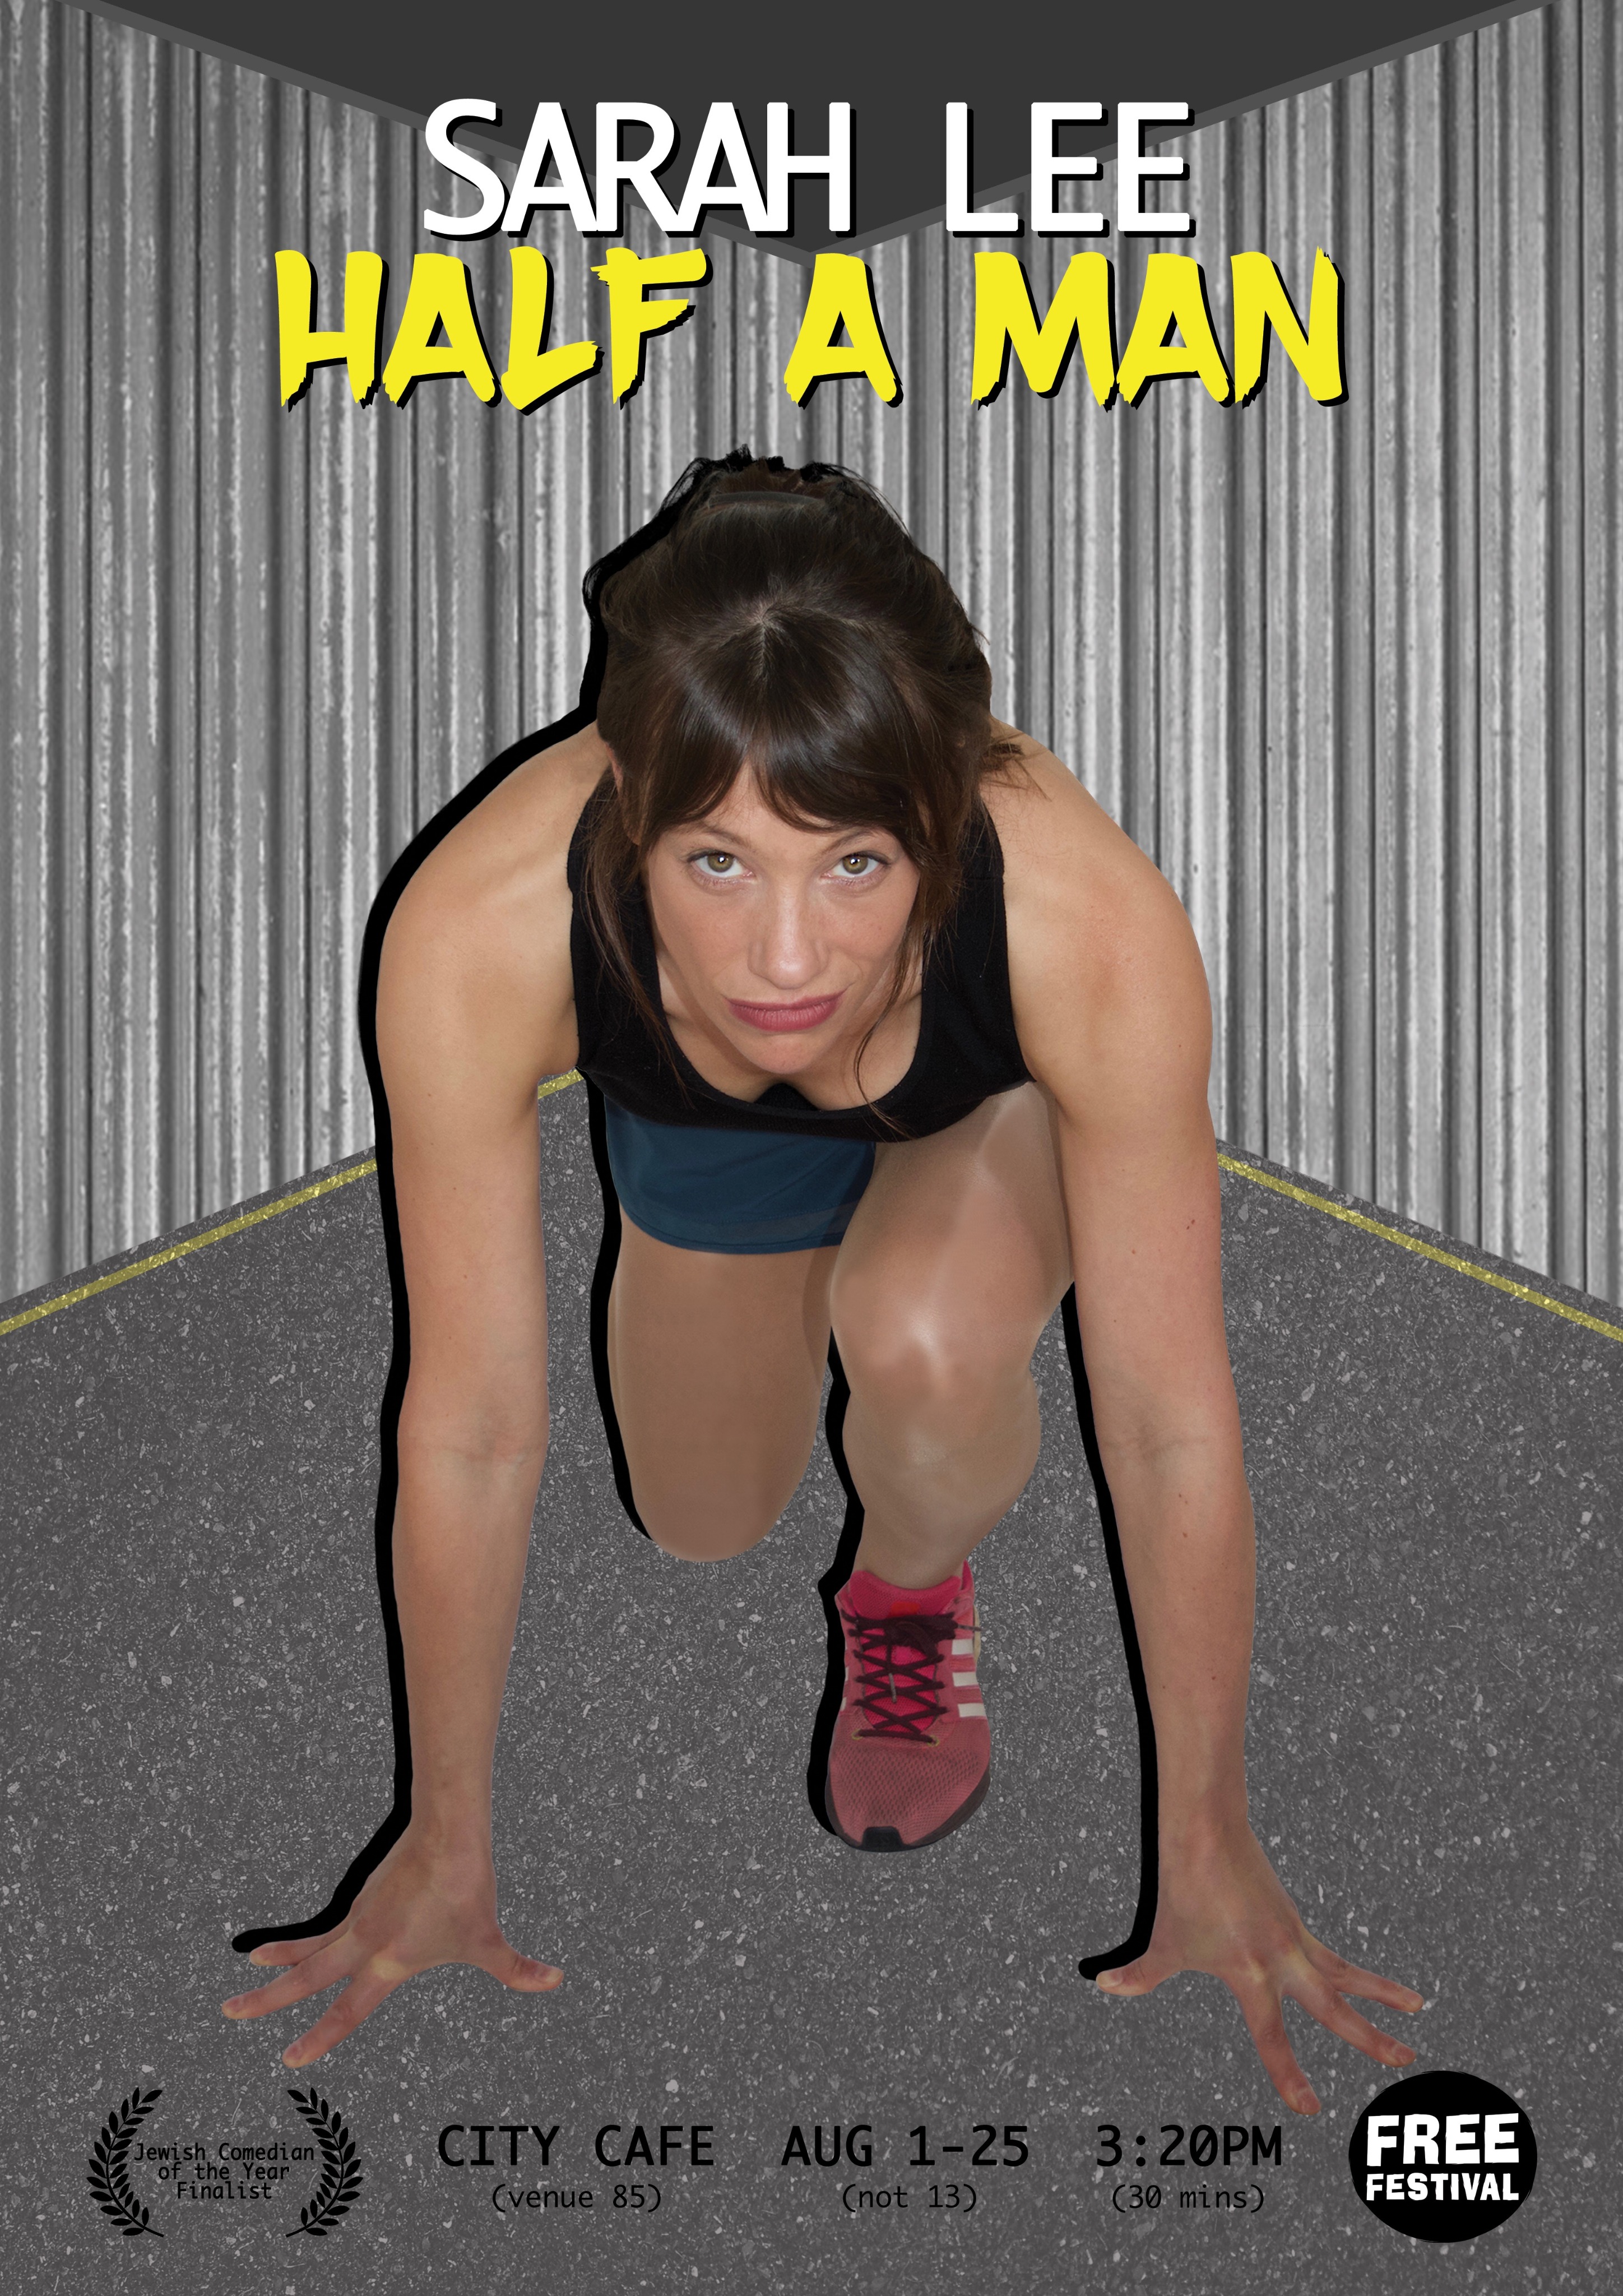 The poster for Sarah Lee: Half A Man